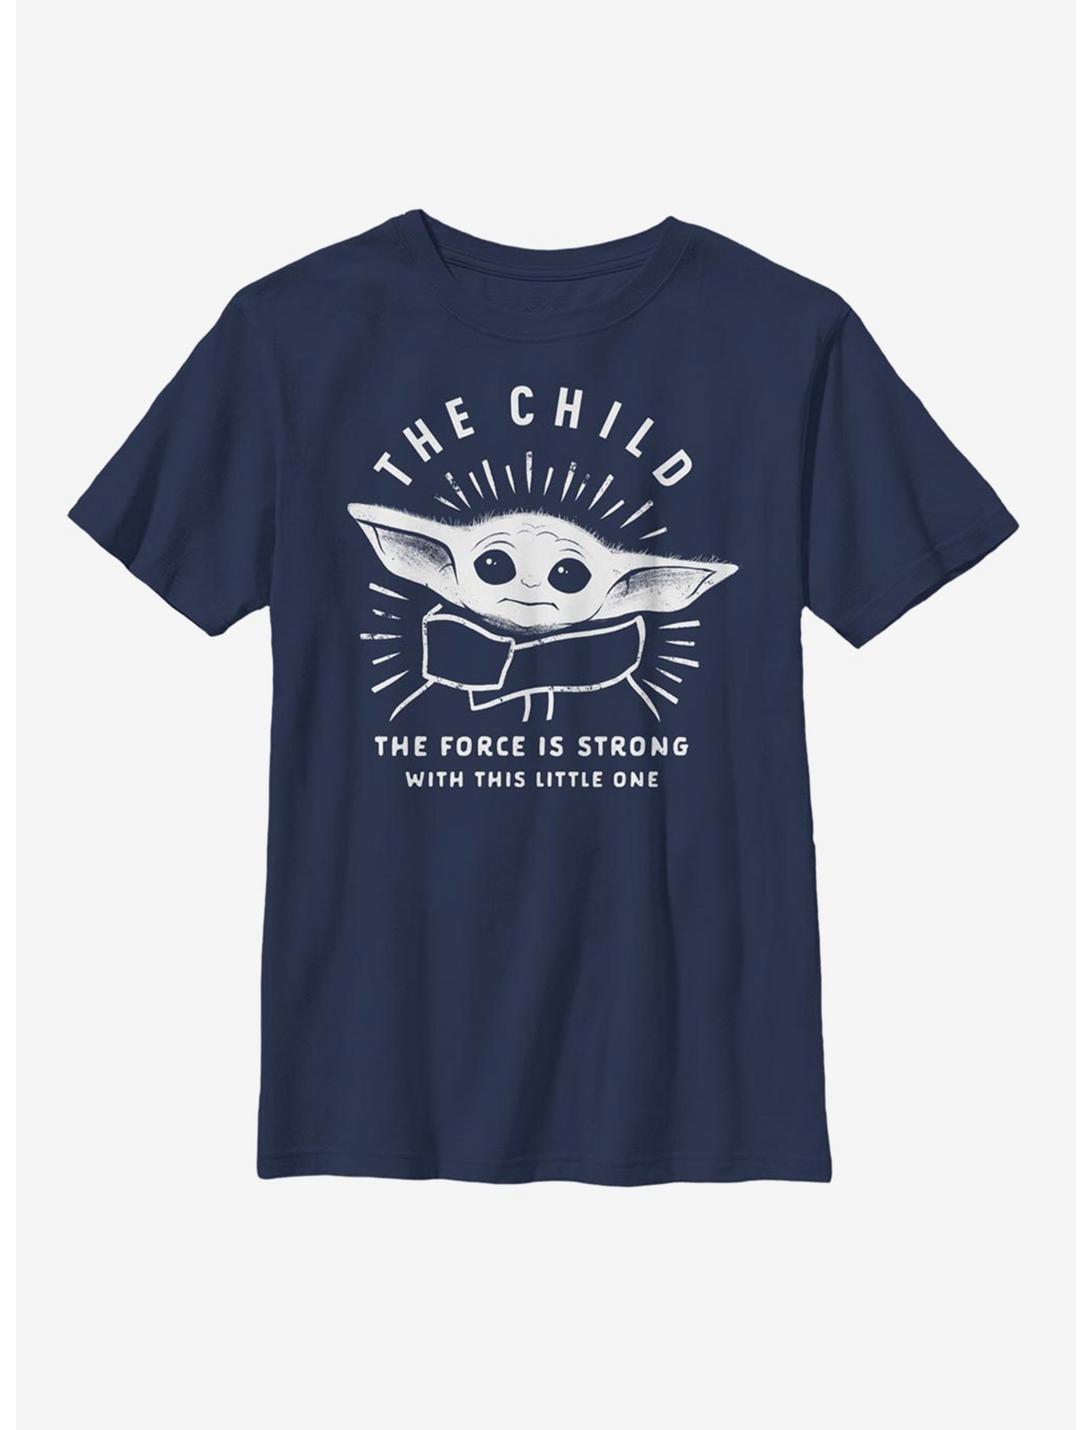 Star Wars The Mandalorian The Child Little One Youth T-Shirt, NAVY, hi-res